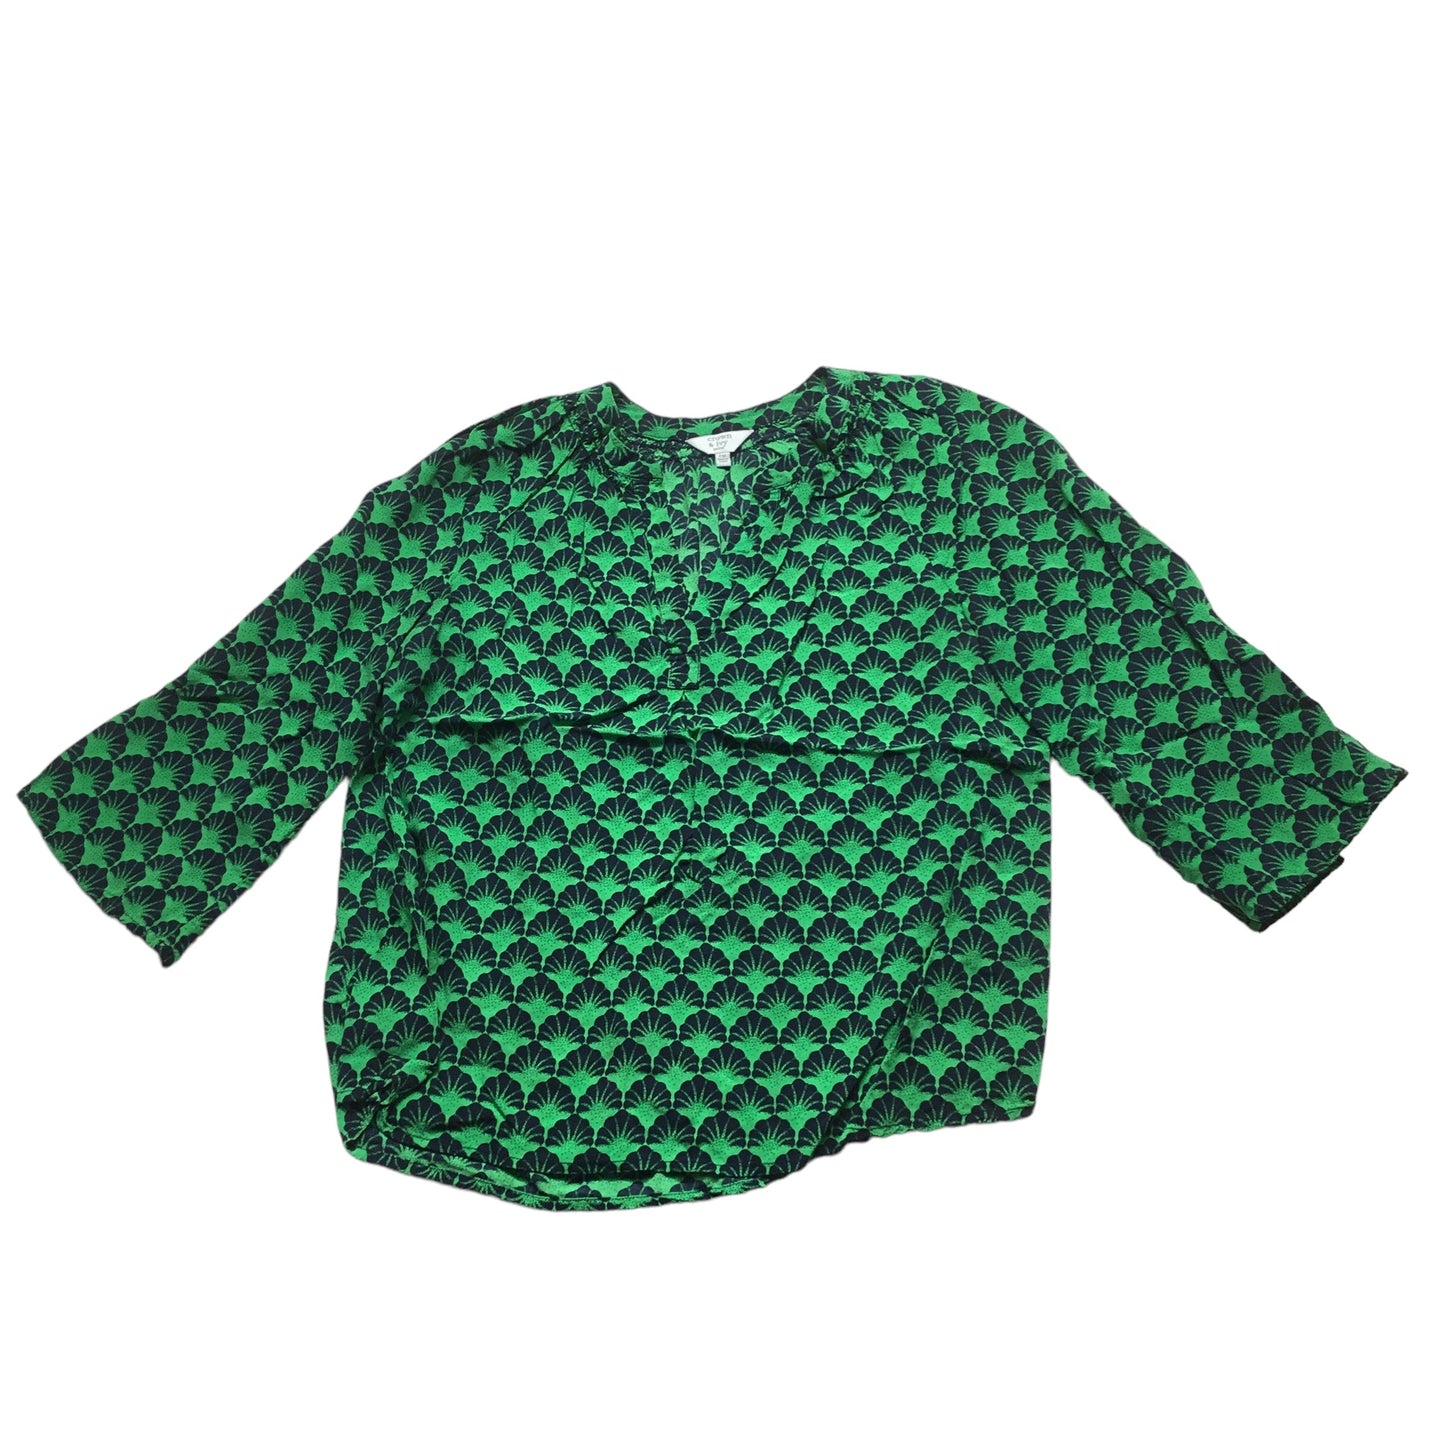 Blue & Green Top 3/4 Sleeve Crown And Ivy, Size Petite  M